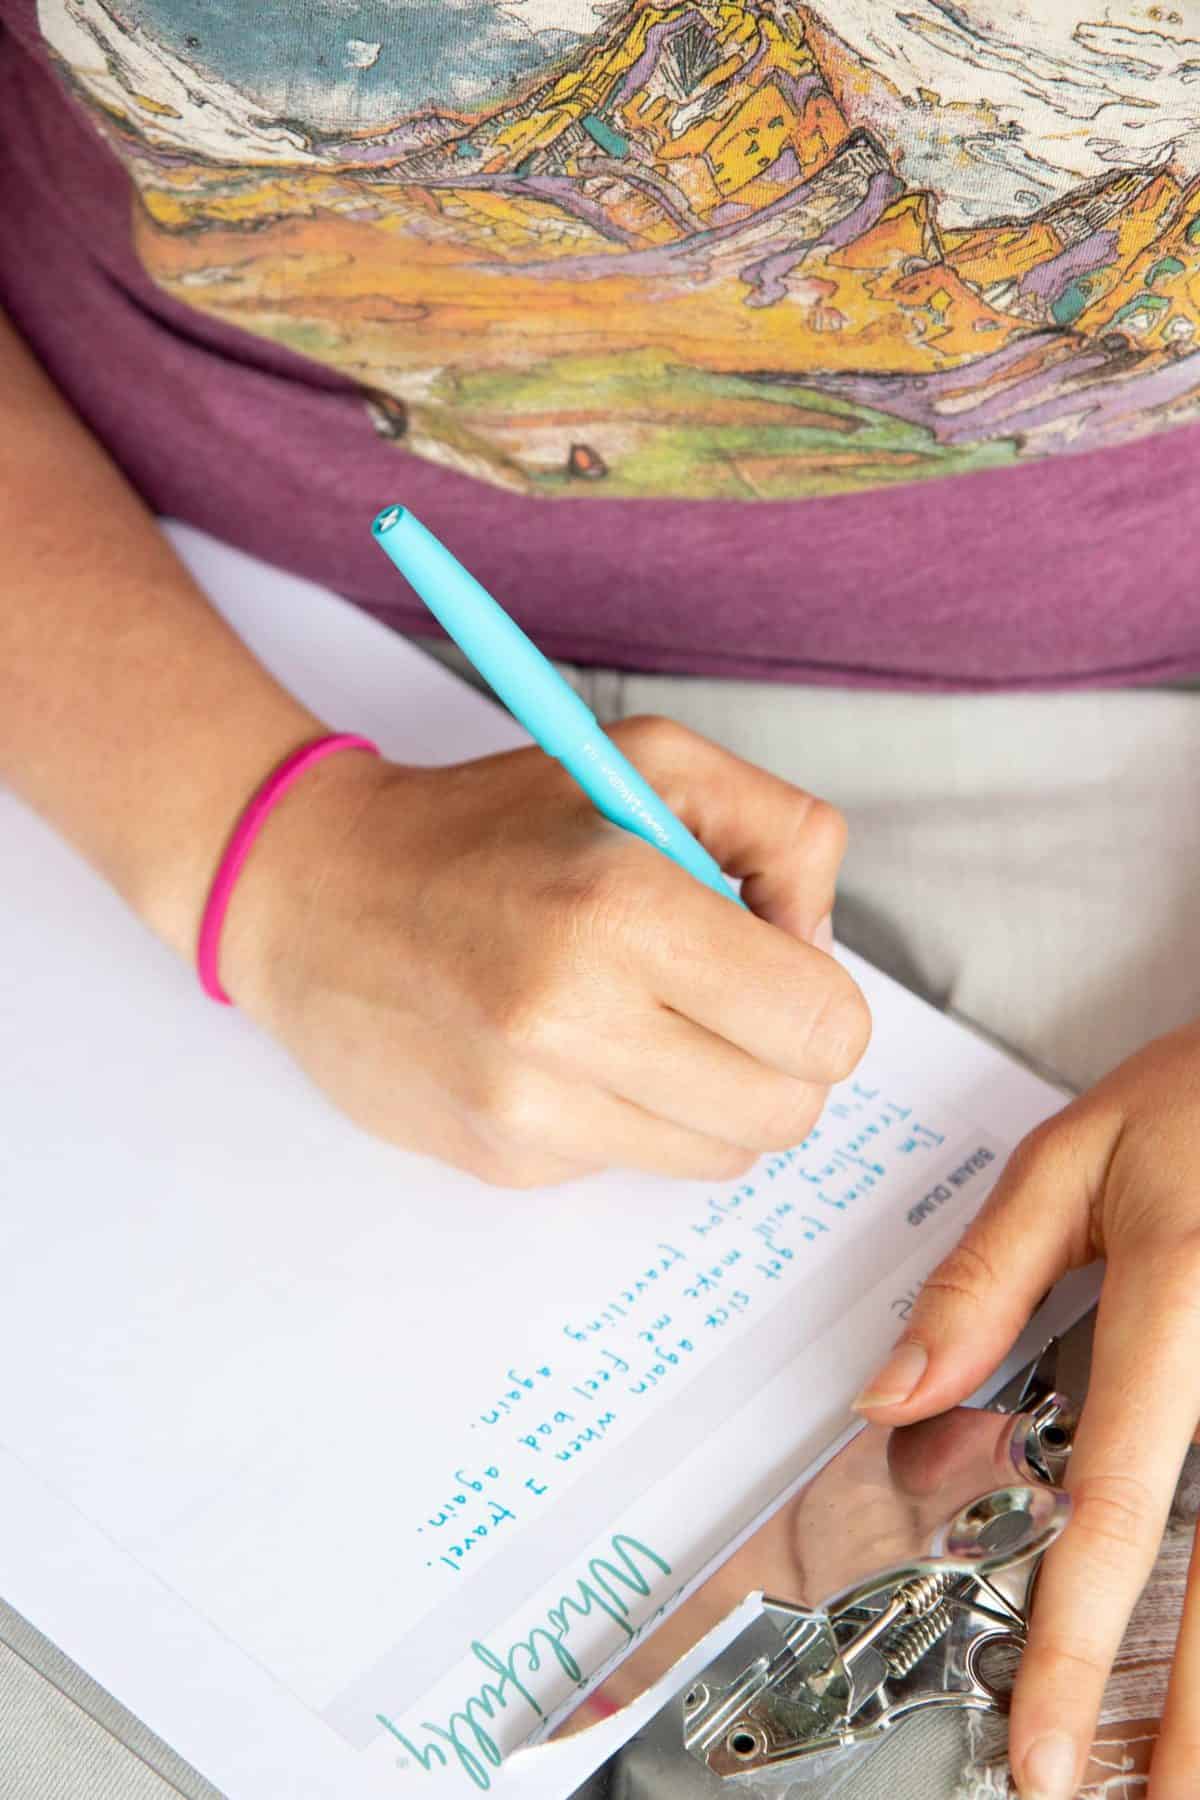 A hand writes on a piece of paper with a blue pen.